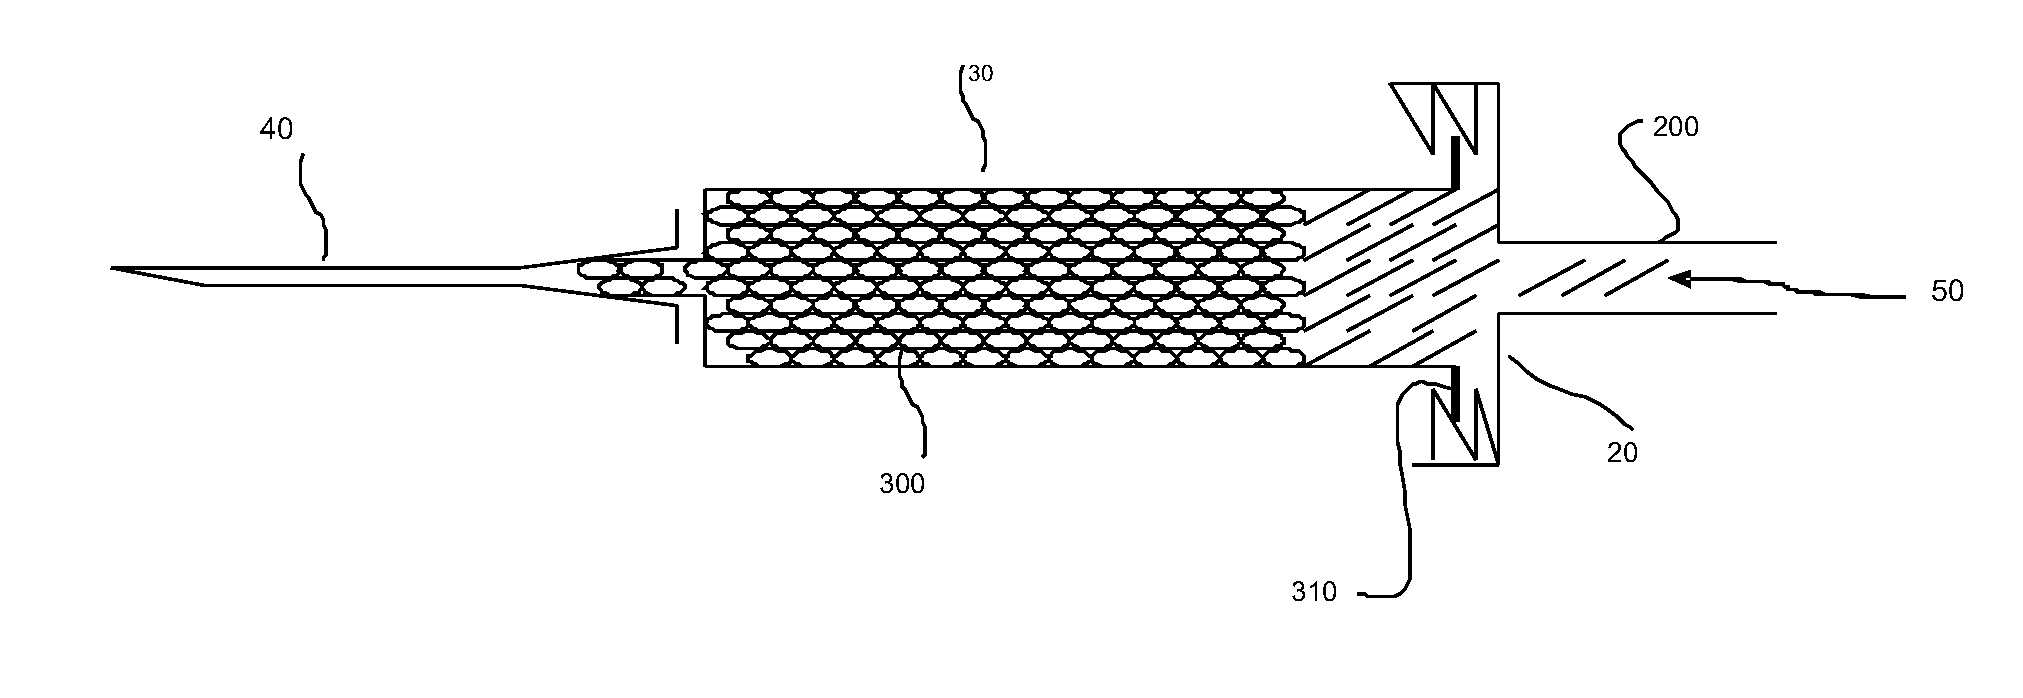 Adapter device for application of small amounts of fat graft material by use of syringes